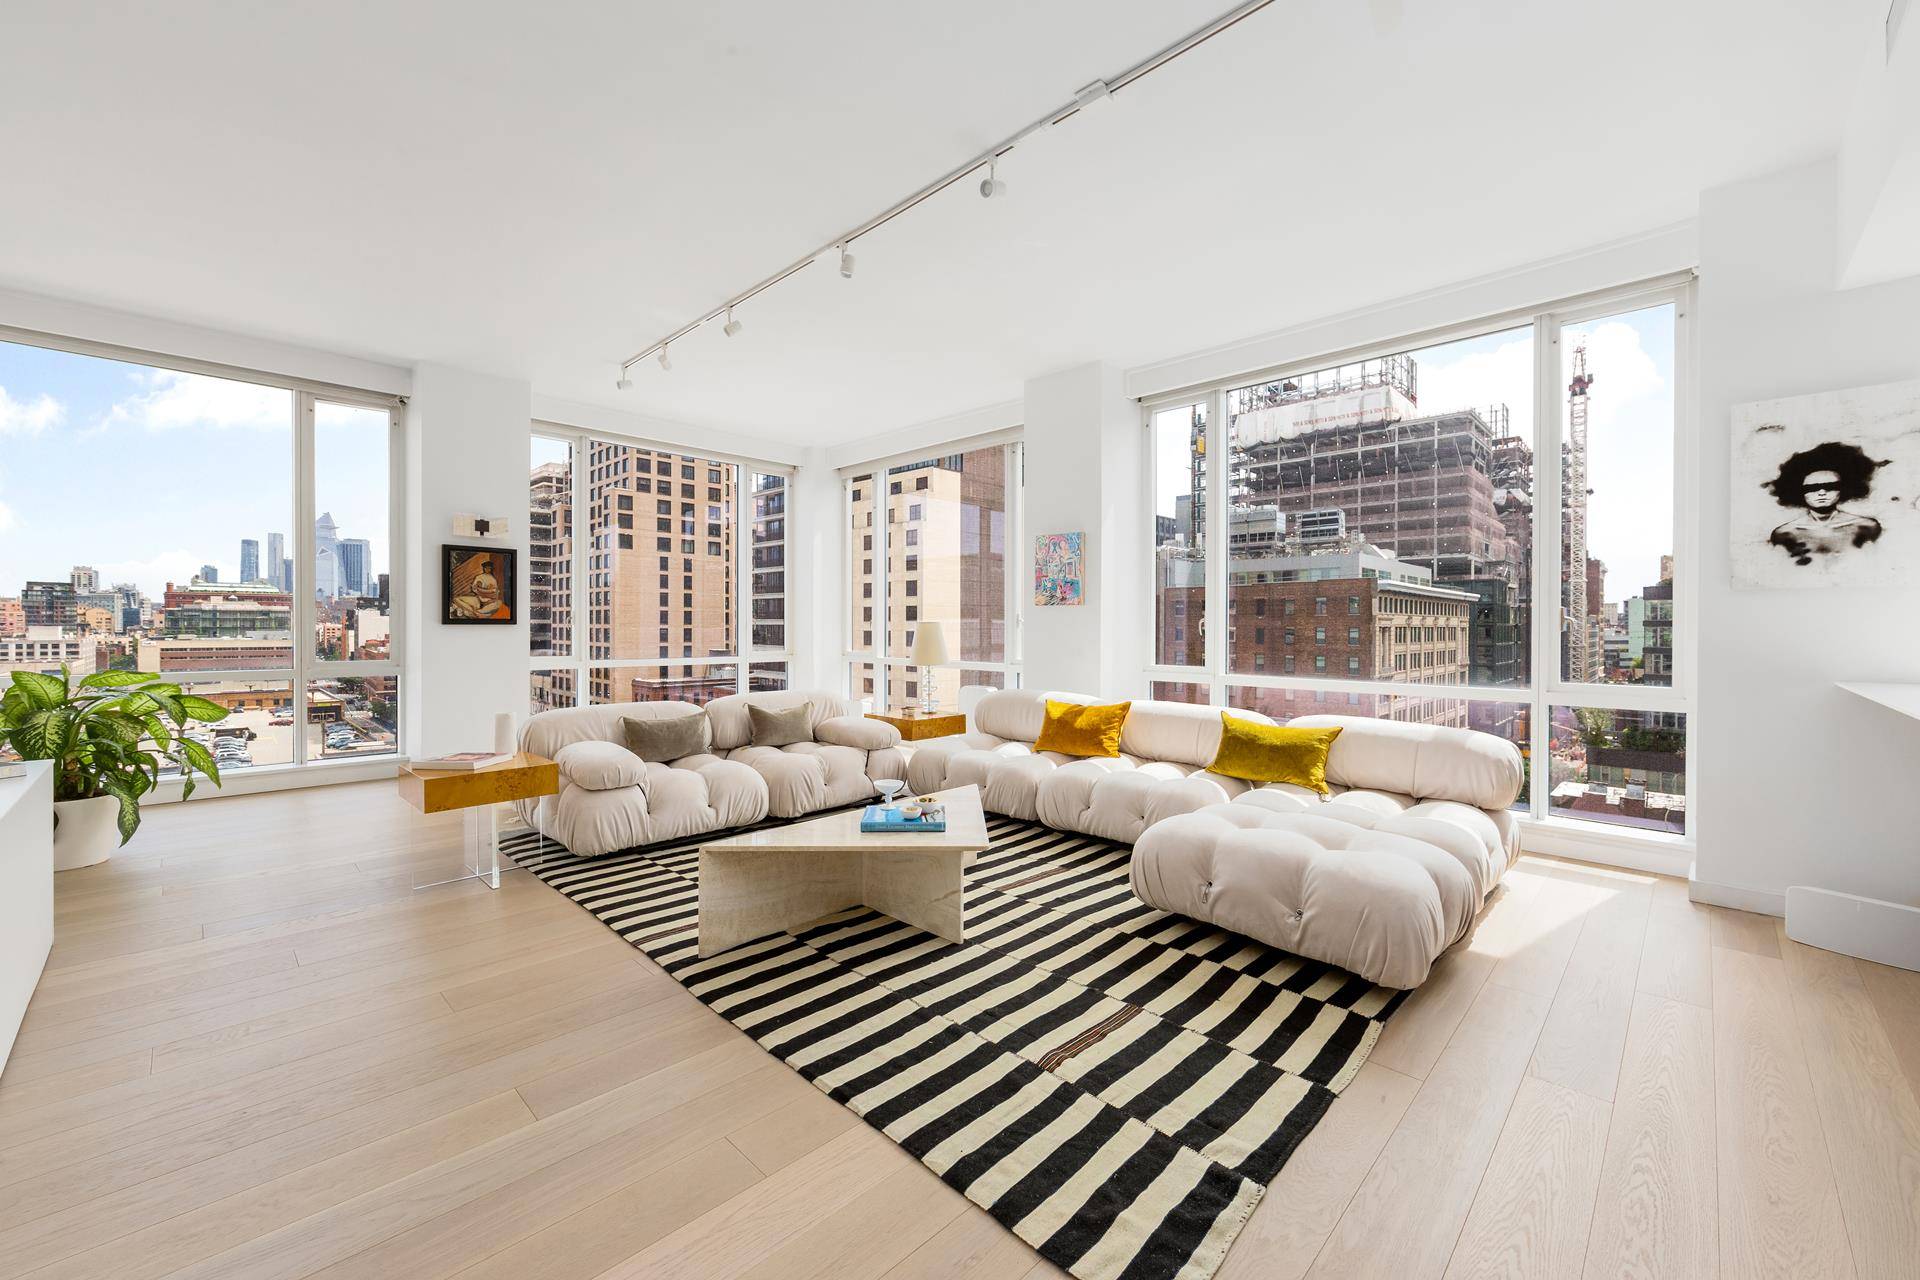 Expansive and bright, 11A is one of the most desirable layouts at The Urban Glass House.